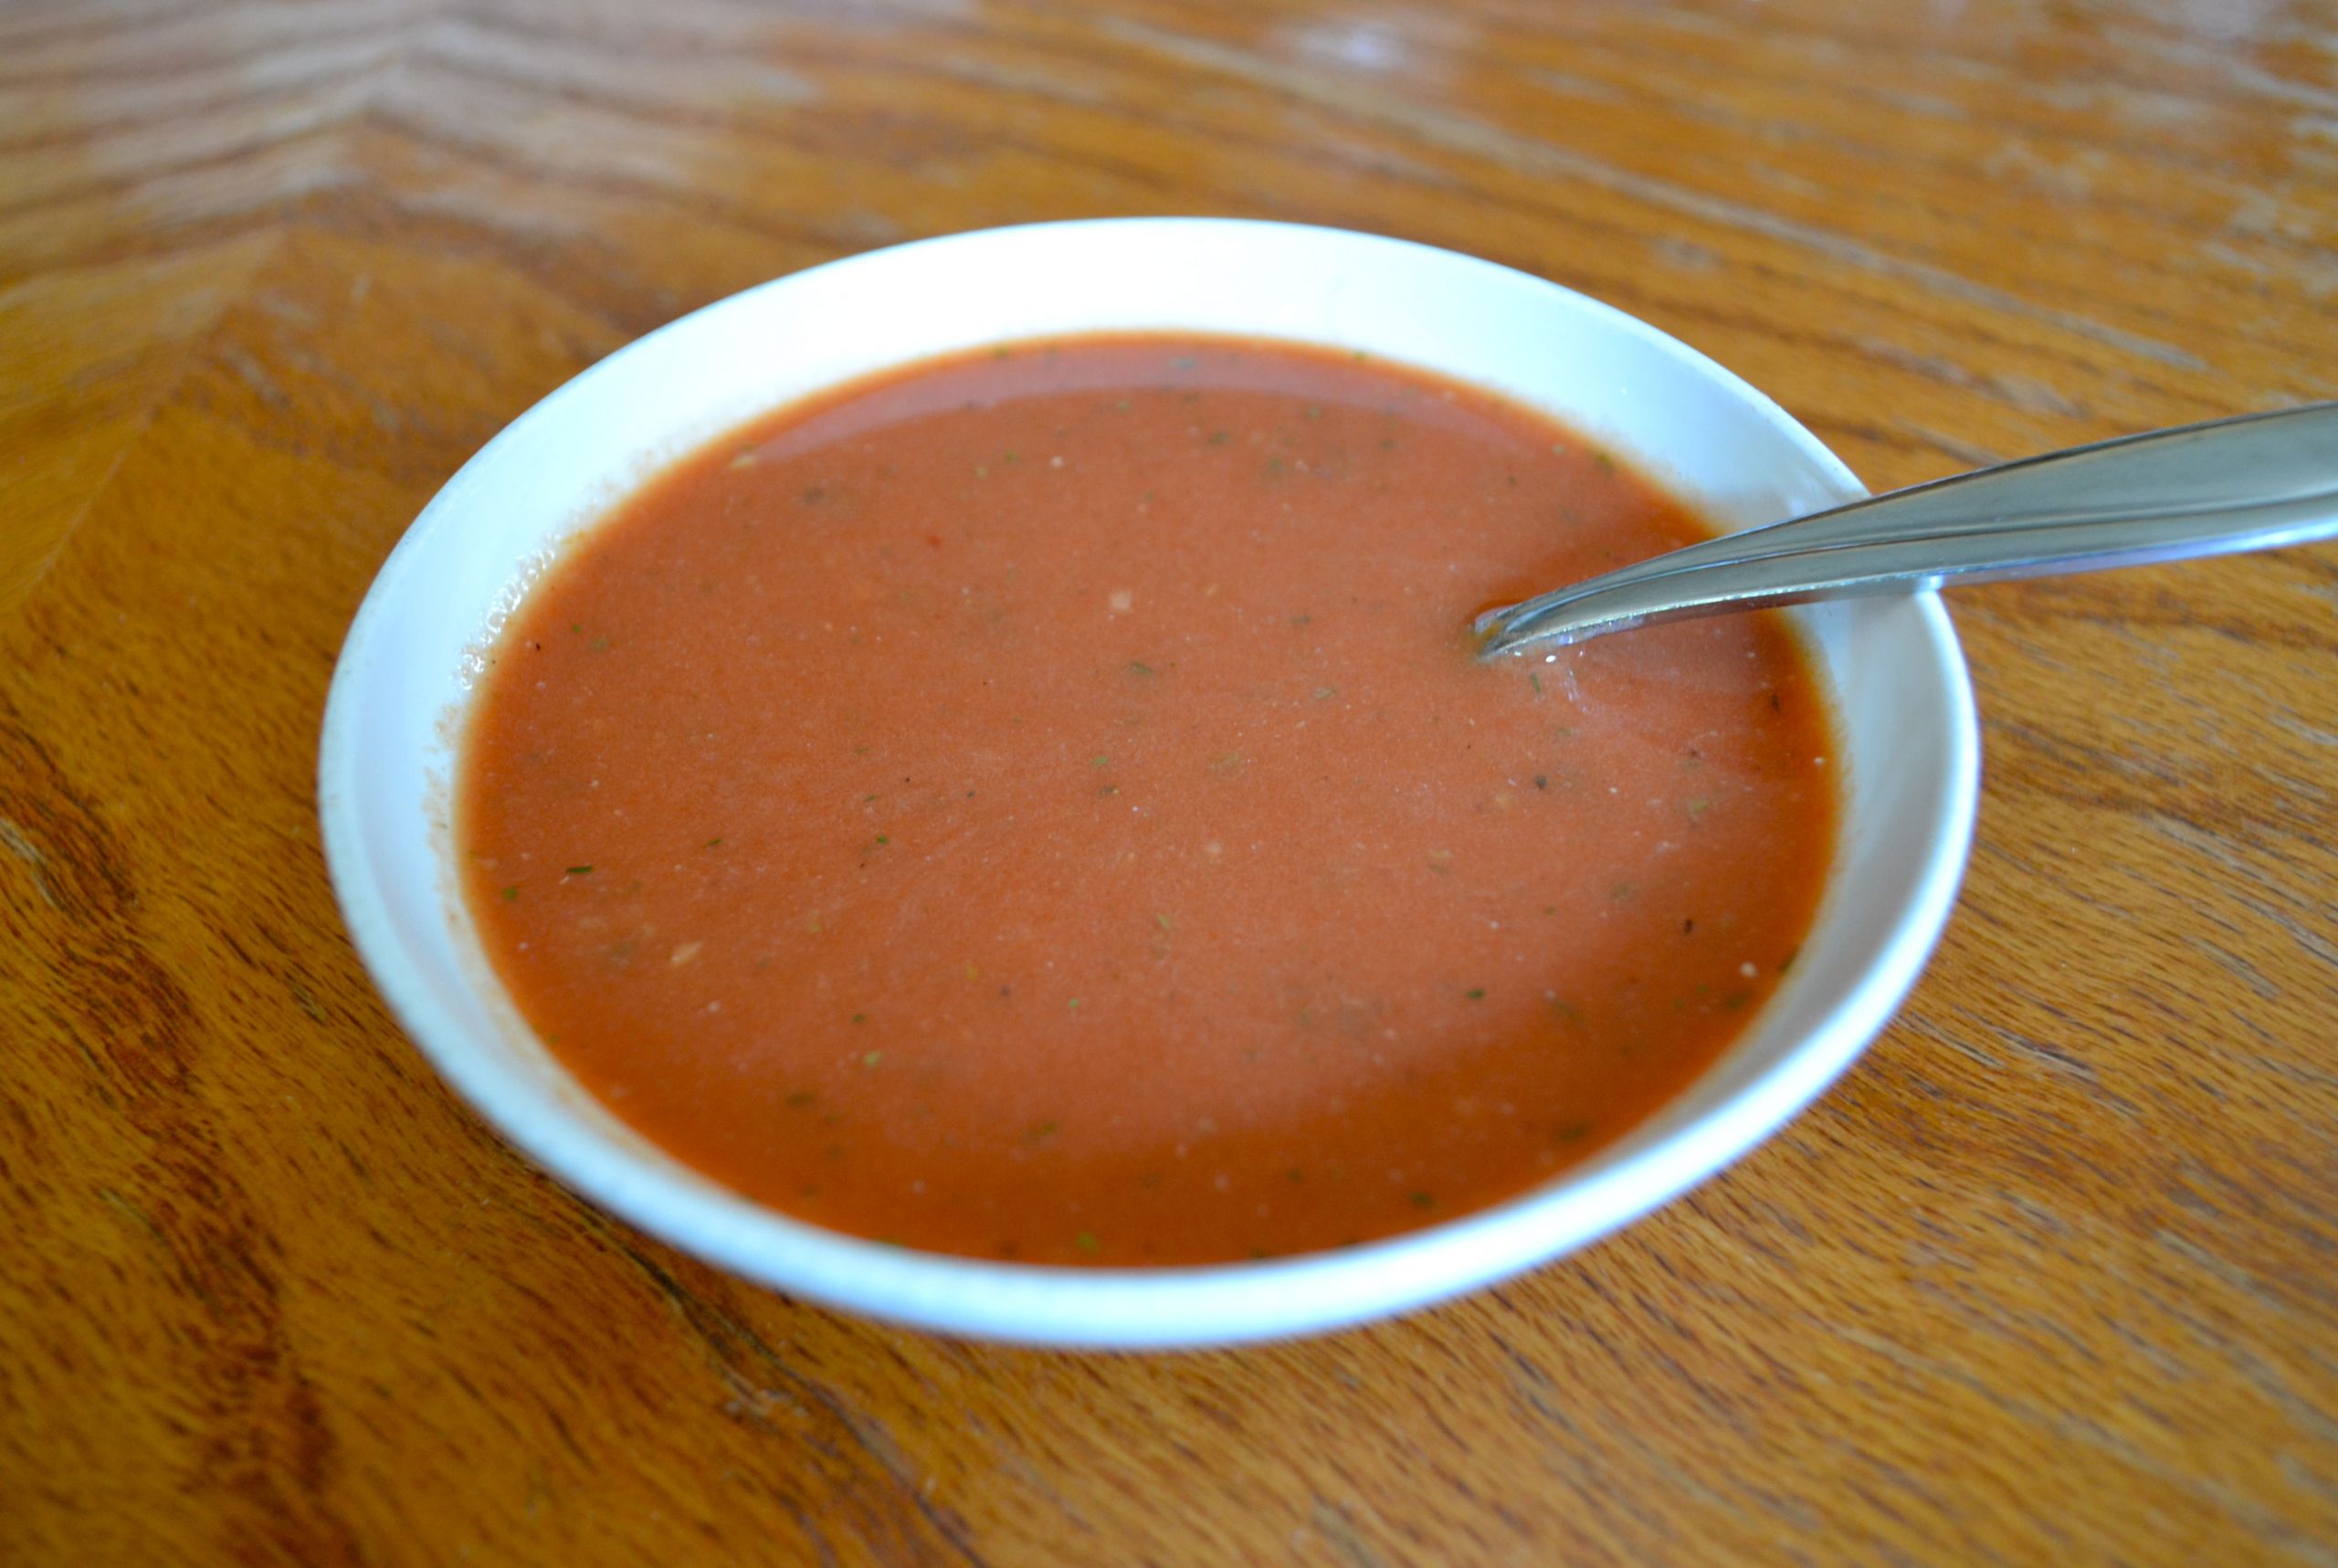 Tomato Soup From Tomato Paste
 Instant Homemade Tomato Soup From a Can of Tomato Paste